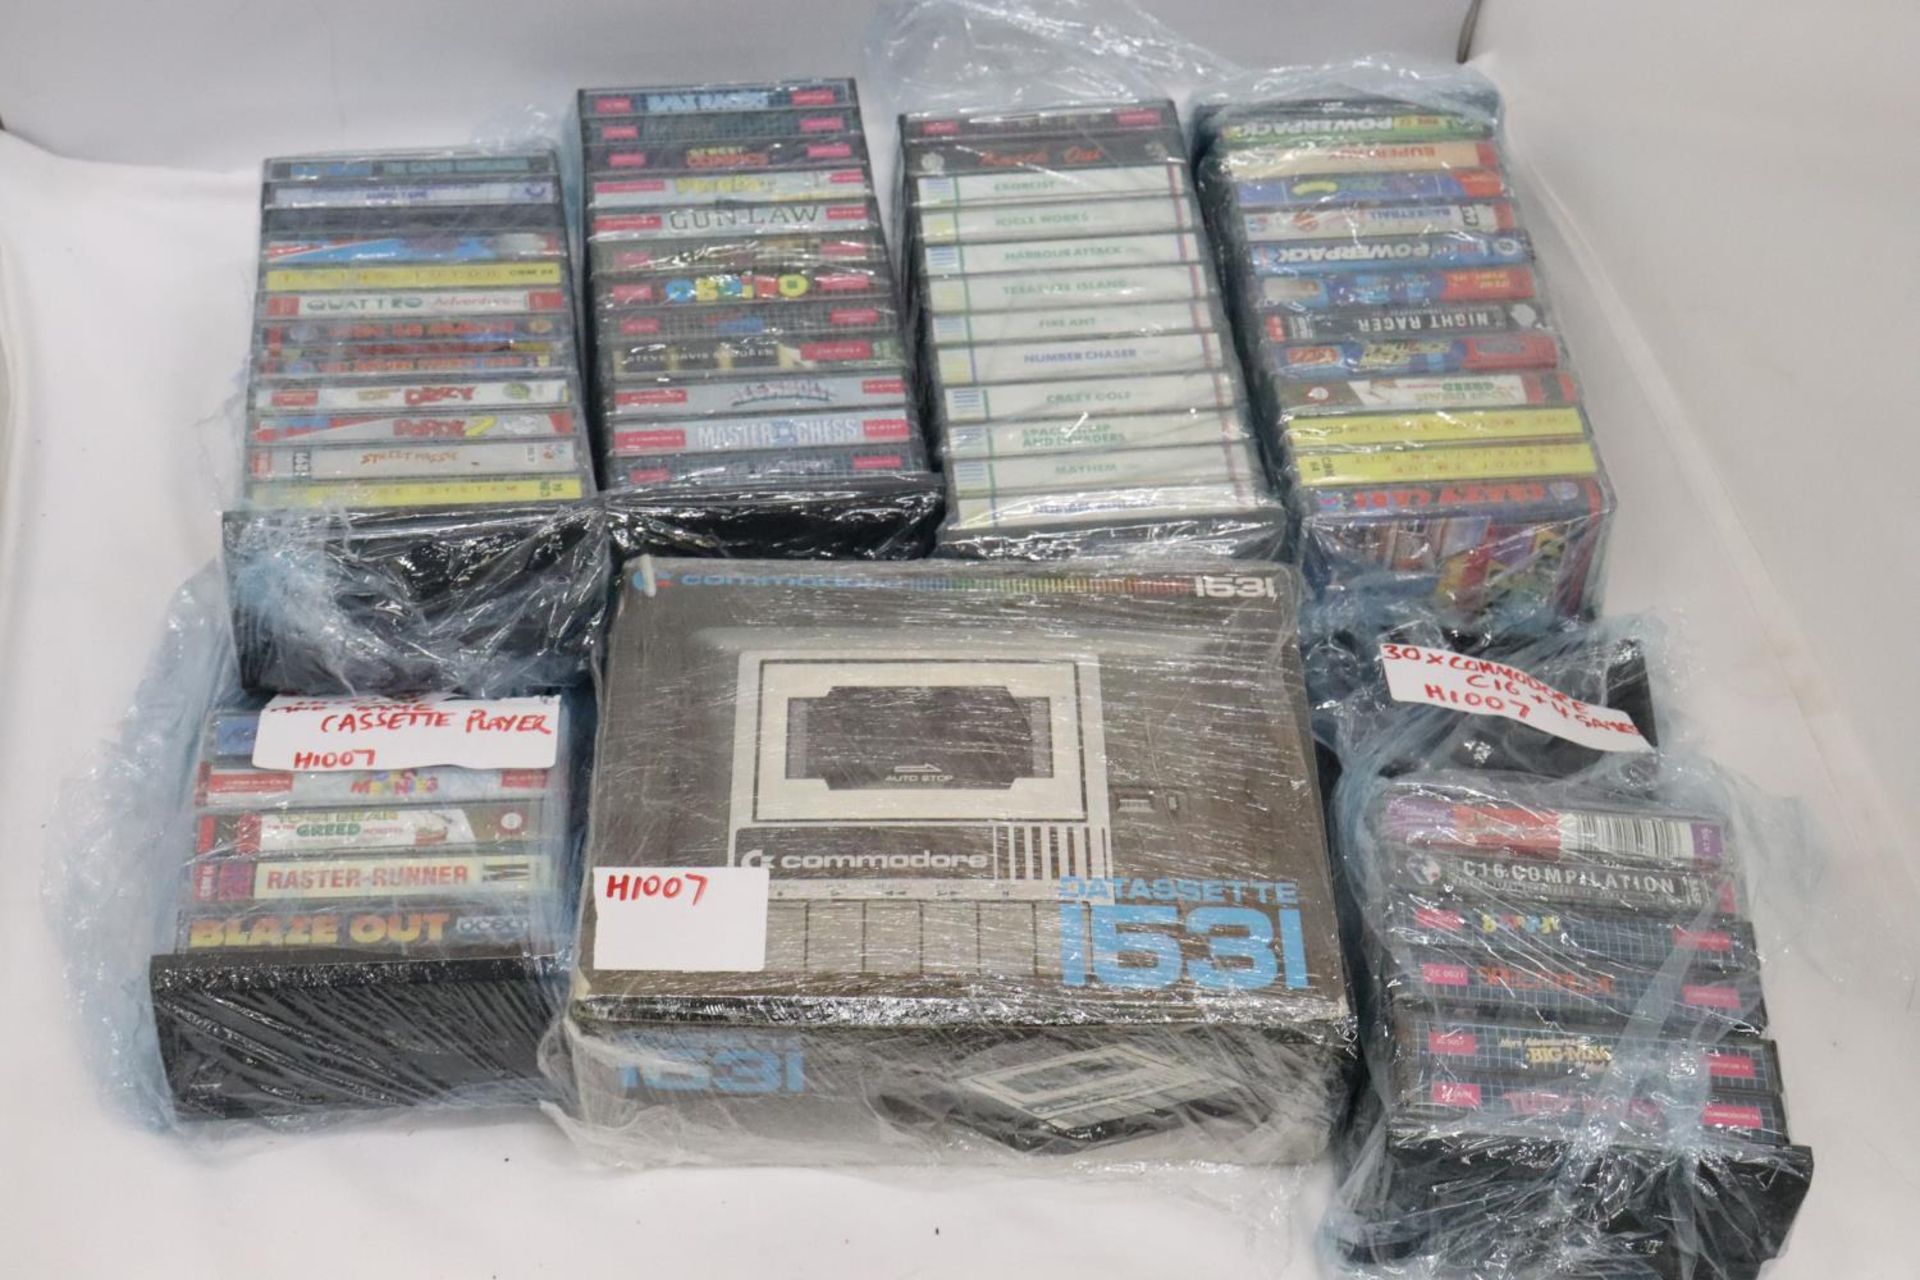 A COMMODORE DATASSETTE 1531 PLUS A LARGE QUANTITY OF COMMODORE 64 GAMES